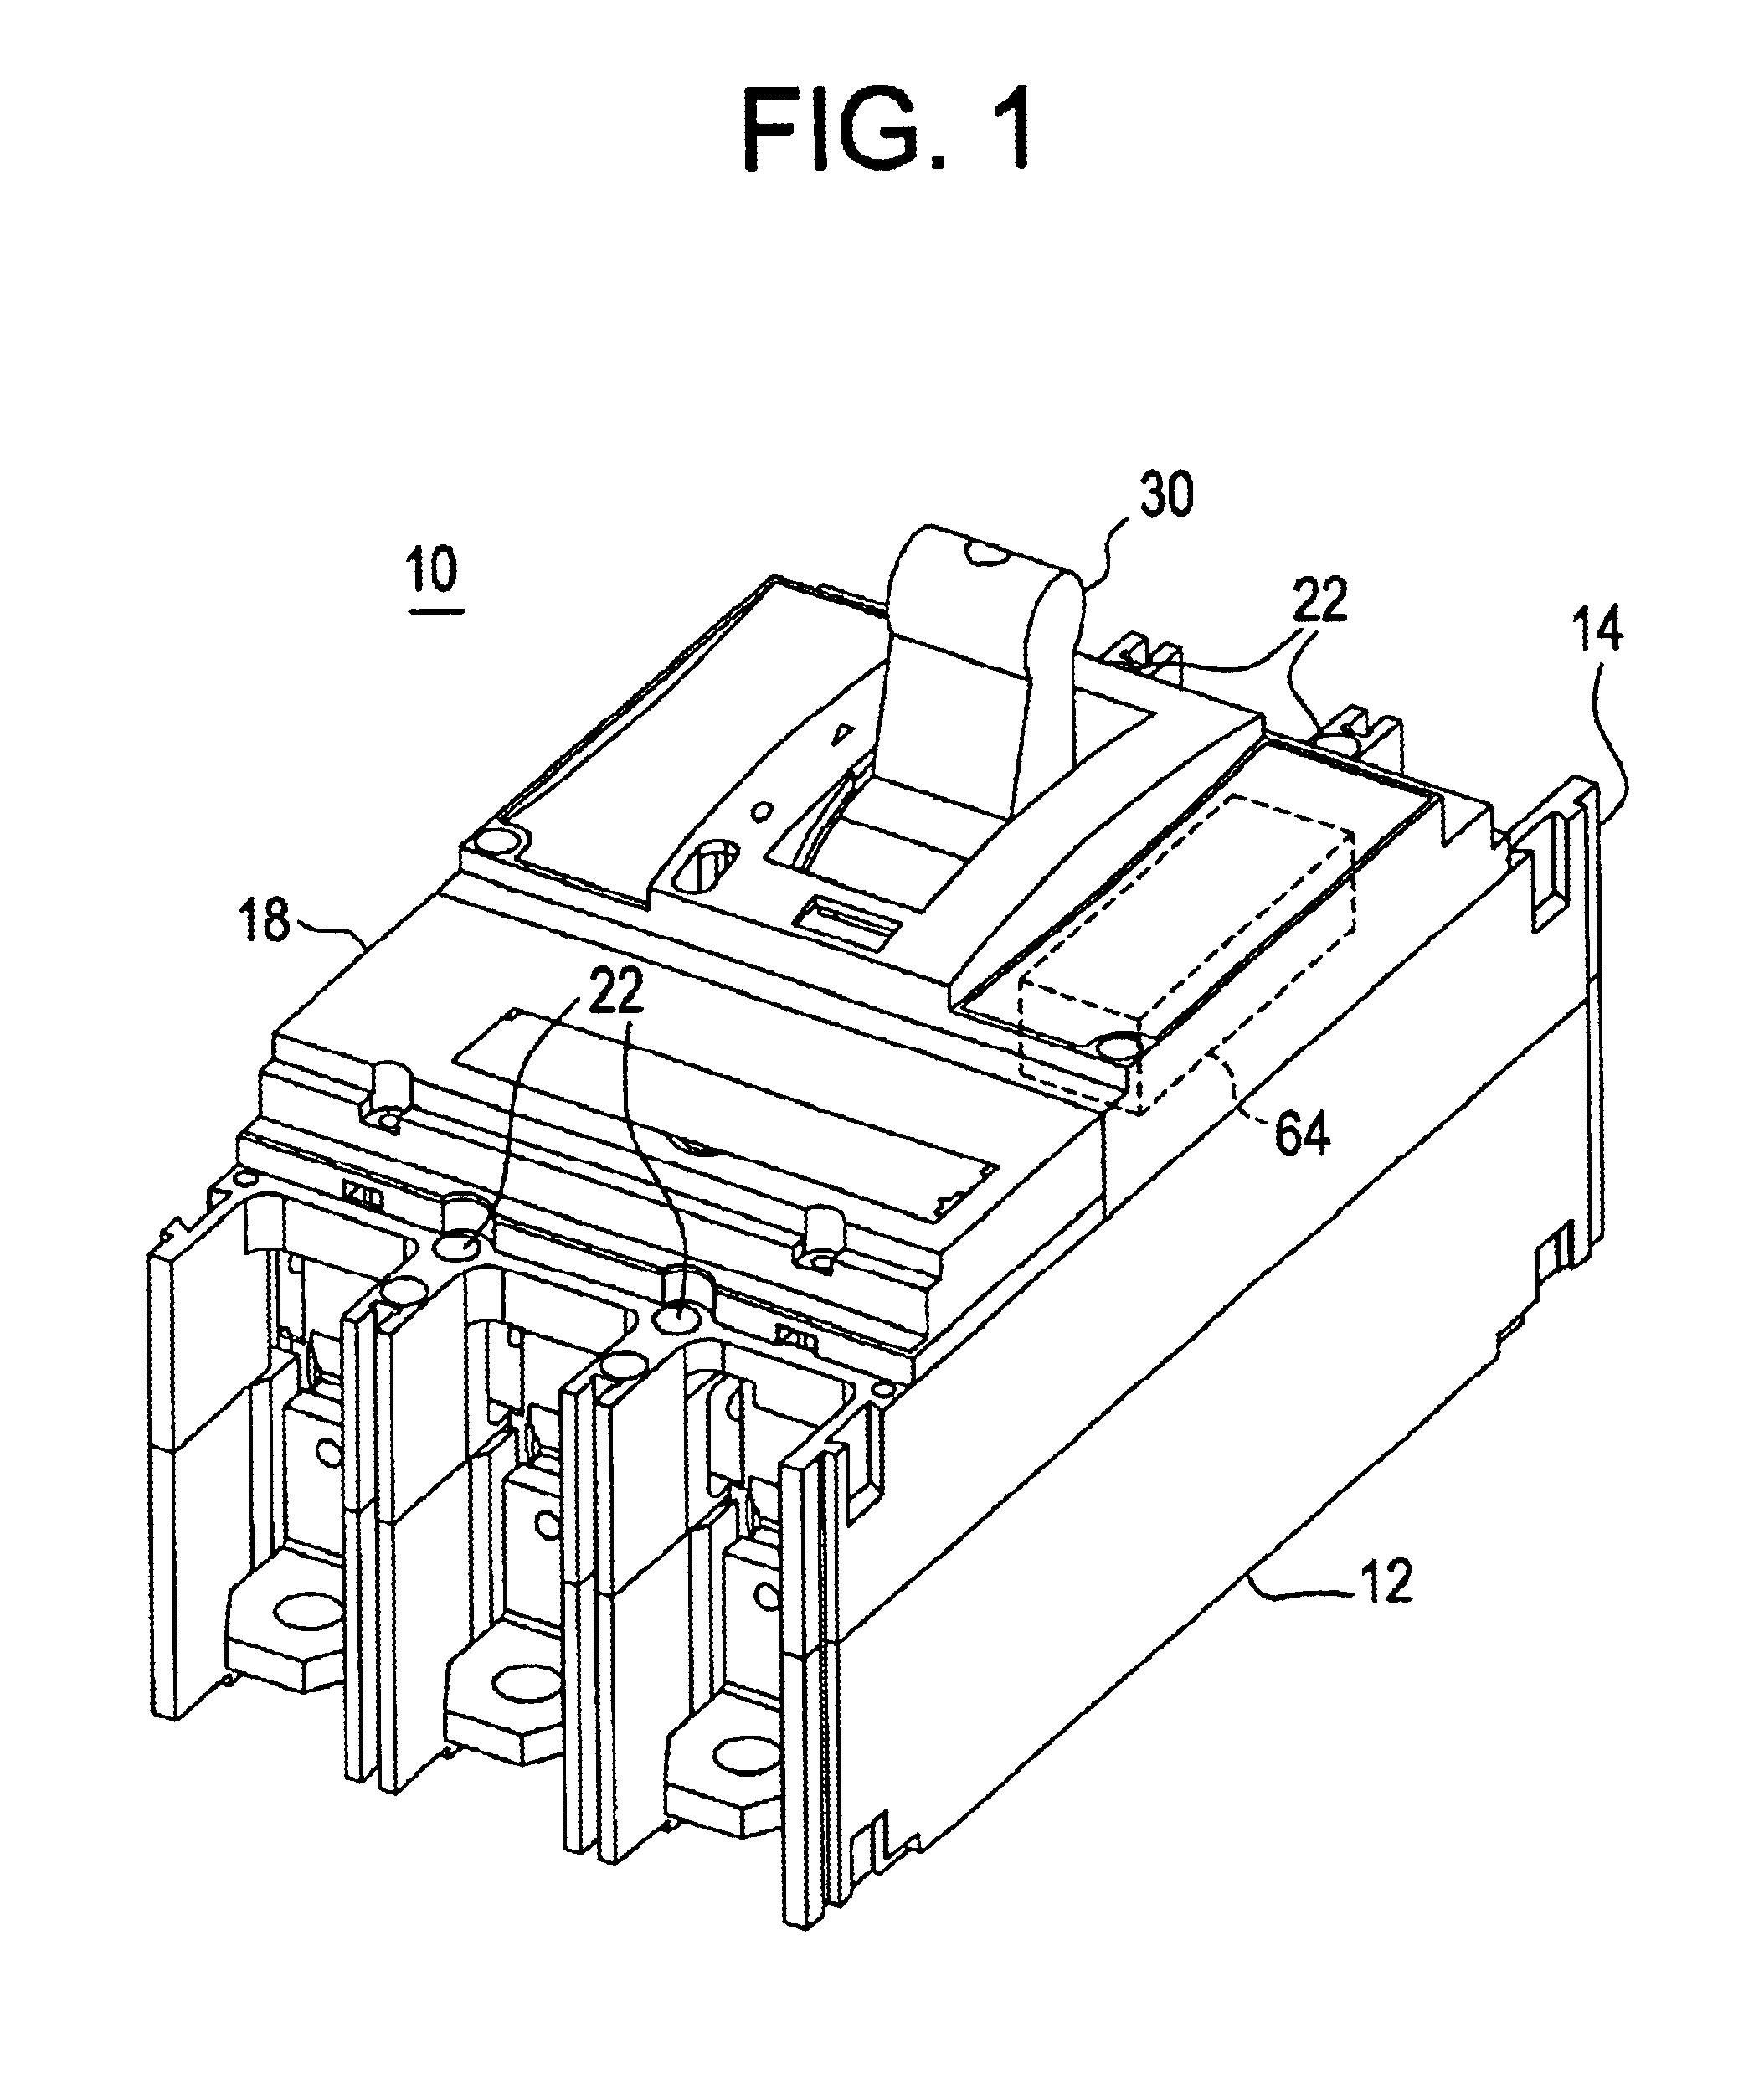 Compact low cost current sensor and current transformer core having improved dynamic range